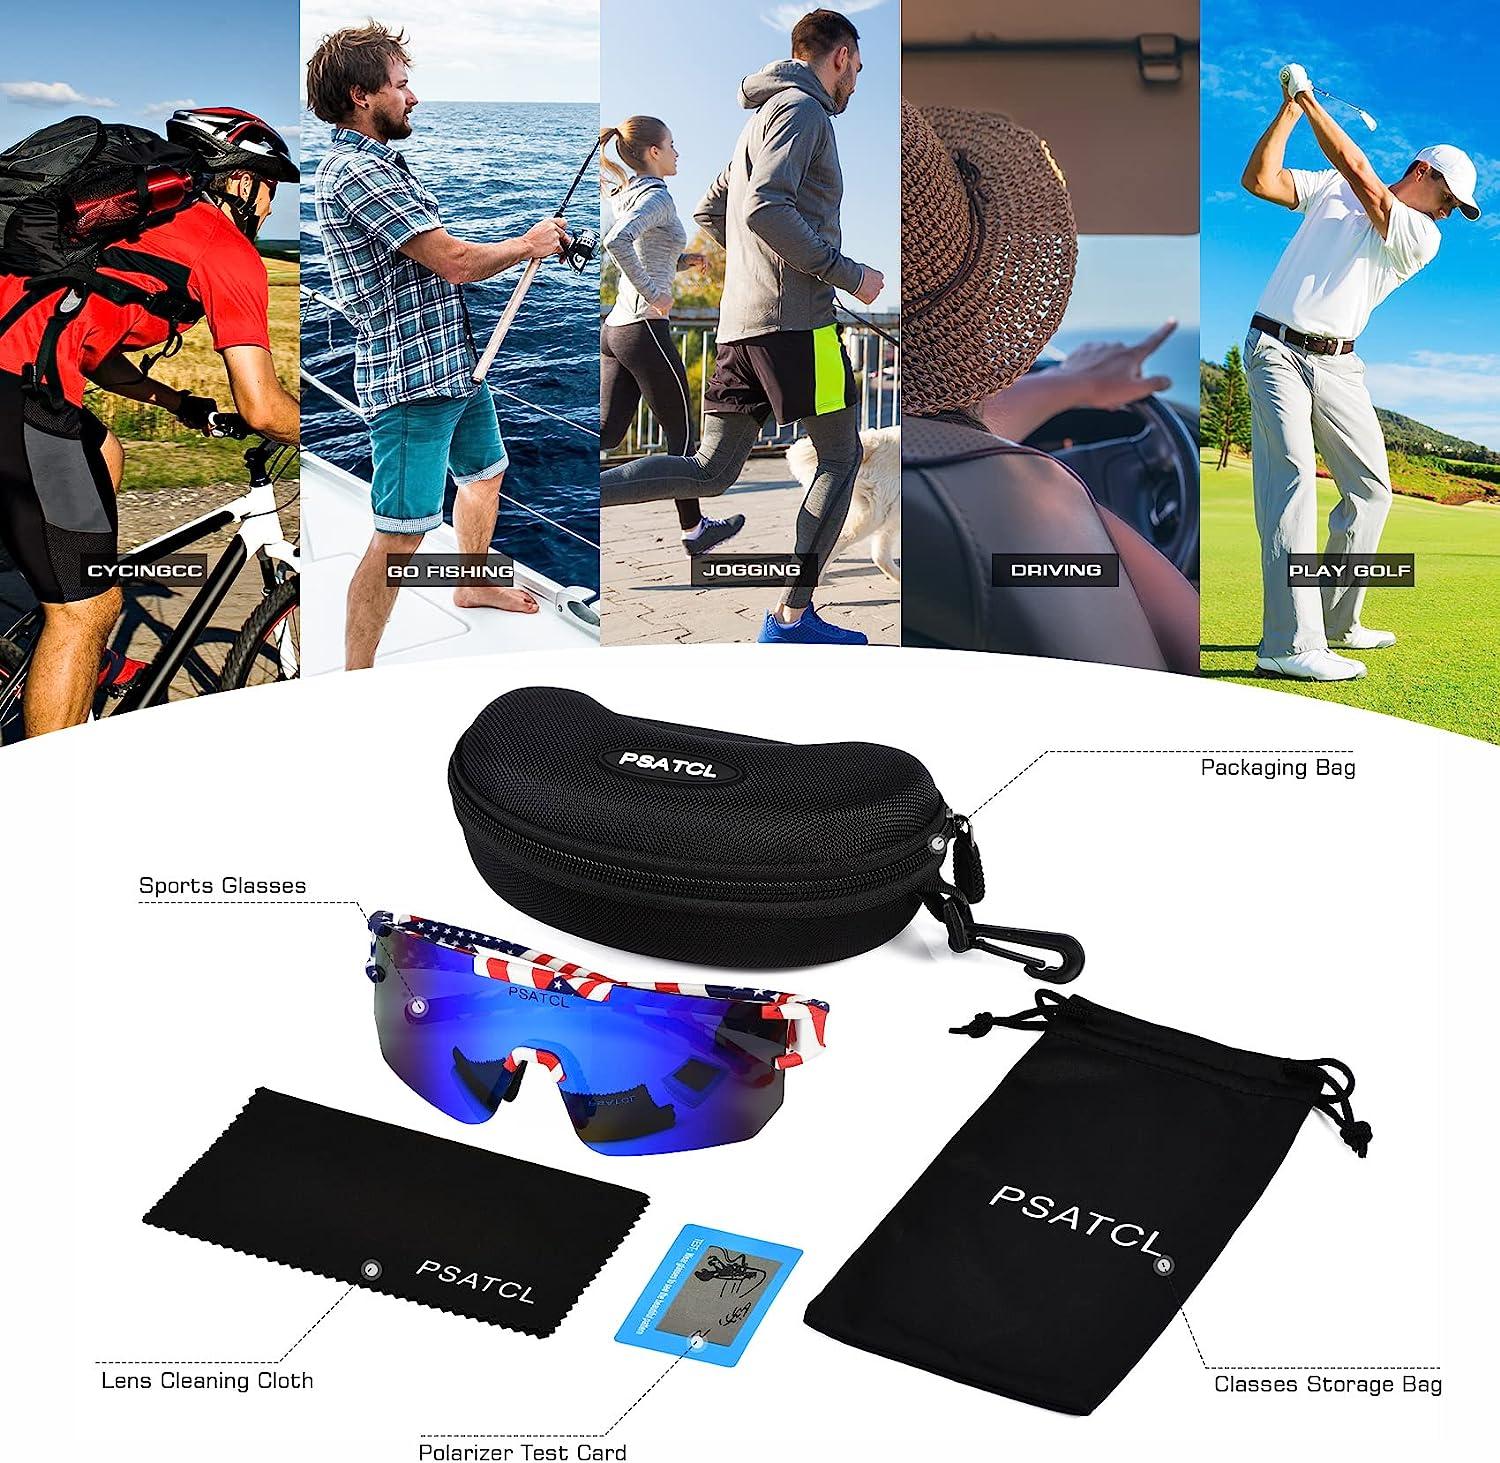 Outdoor Sports Polarized Sunglasses for Fishing Running Golf